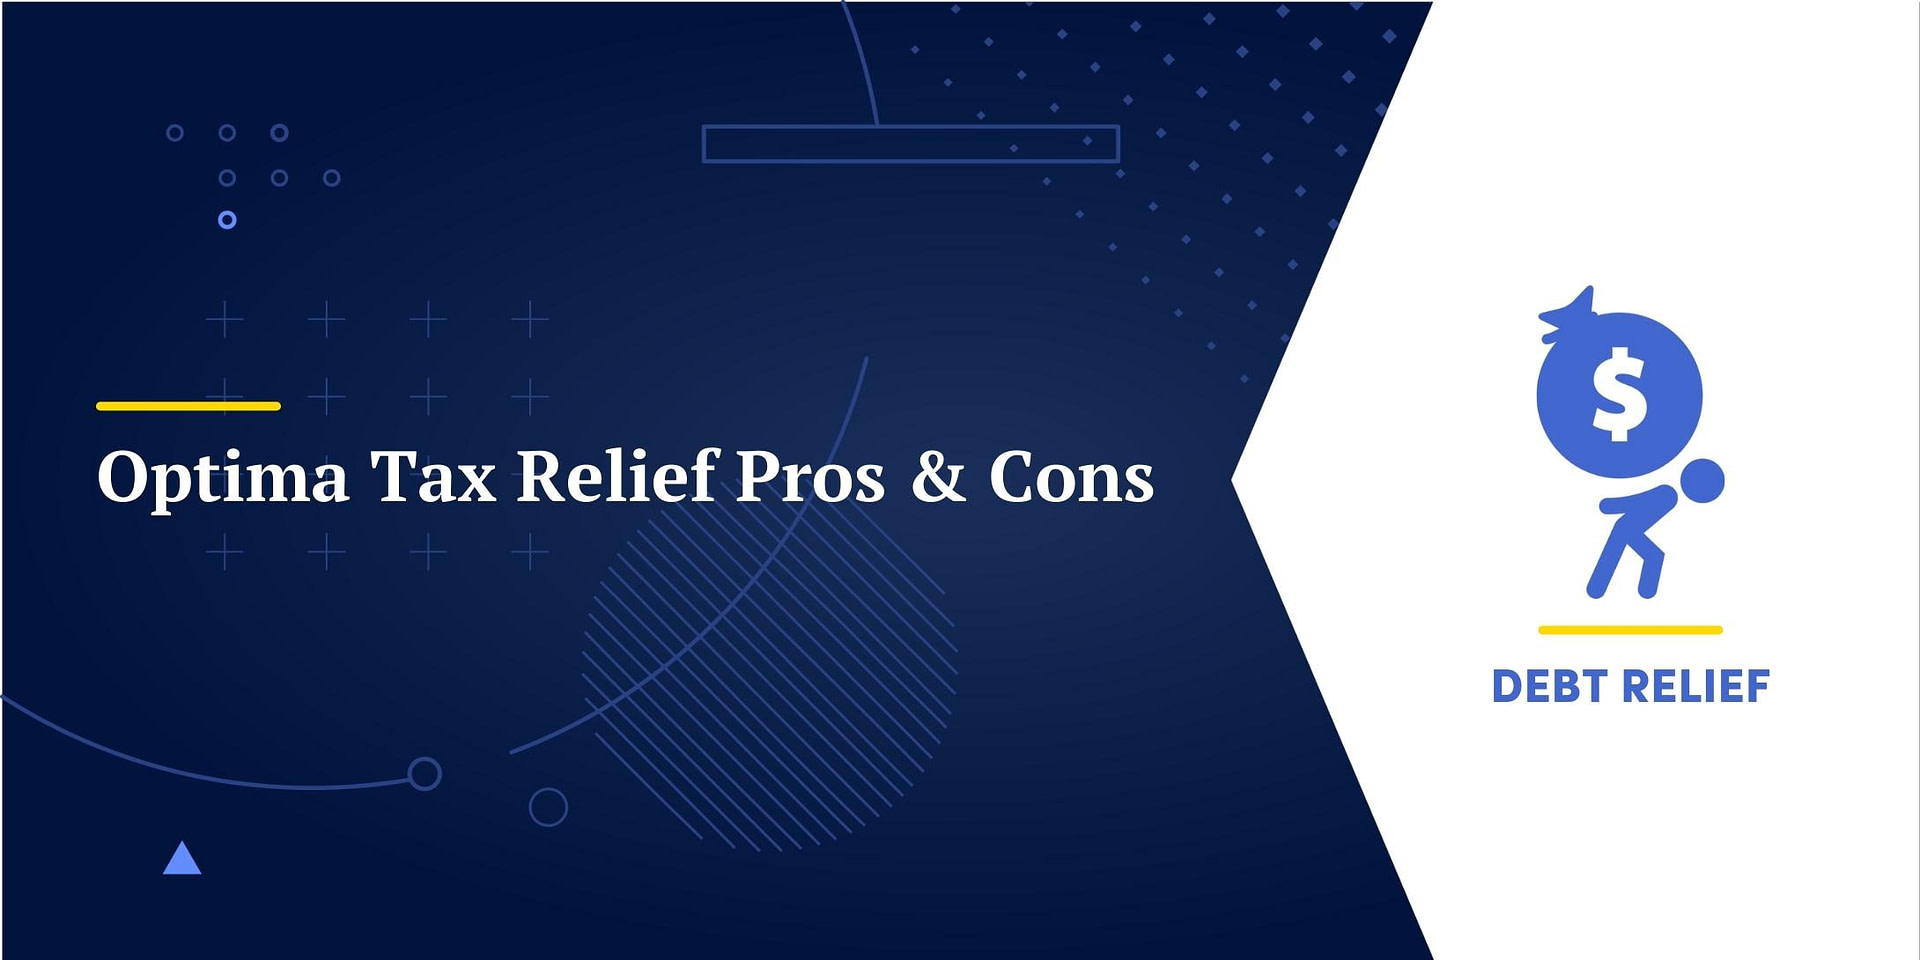 Pros And Cons Of Optima Tax Relief